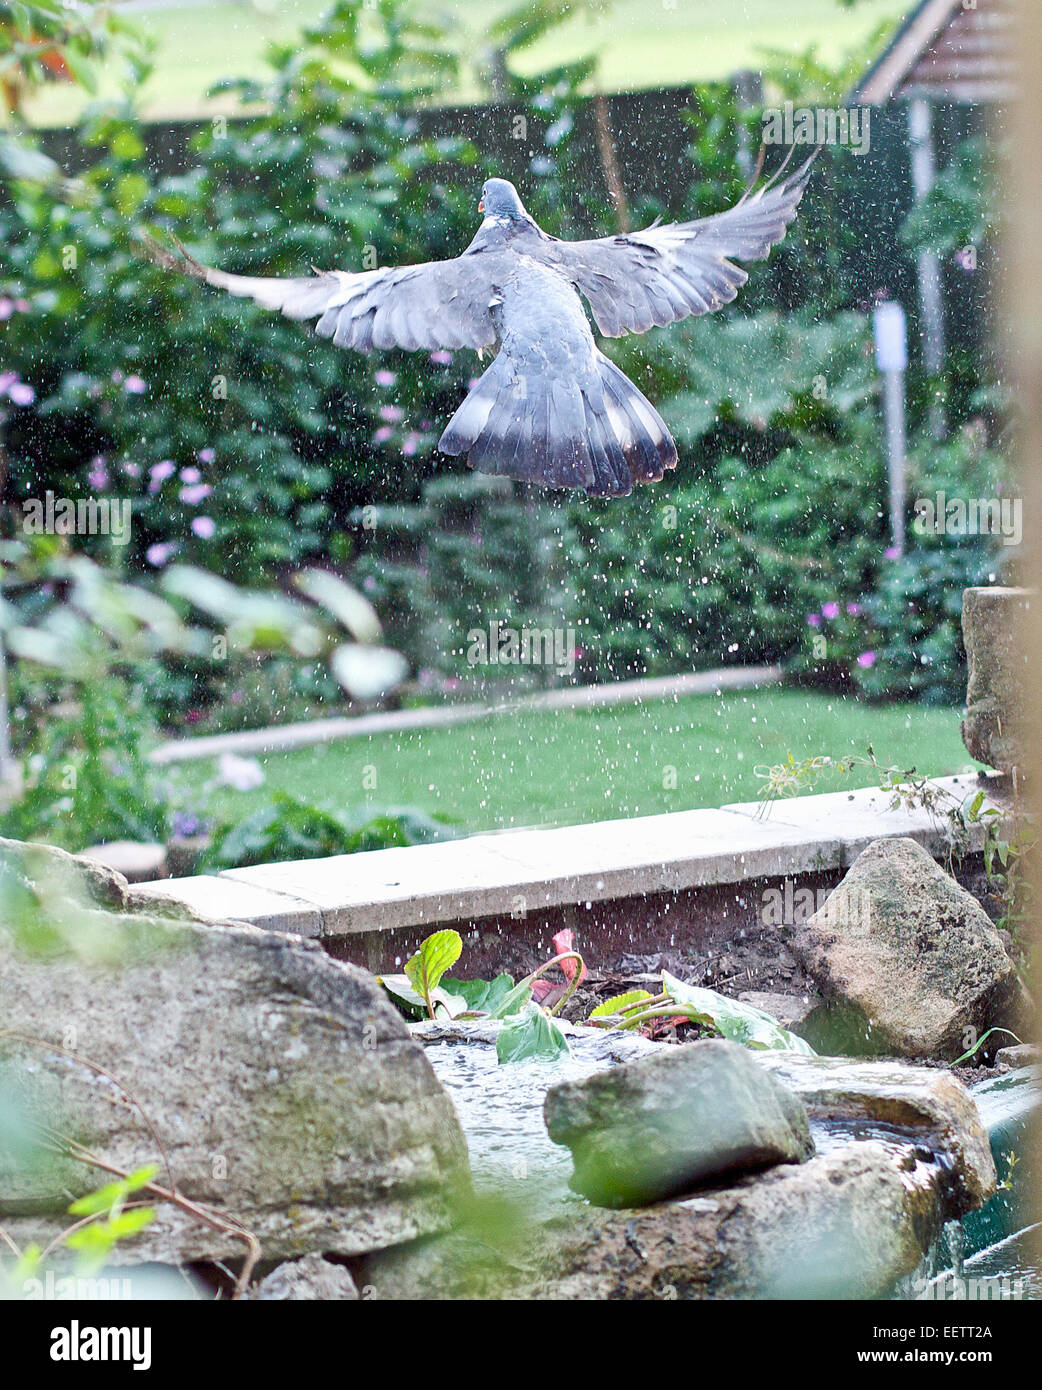 wood pigeon alighting from a pond Stock Photo